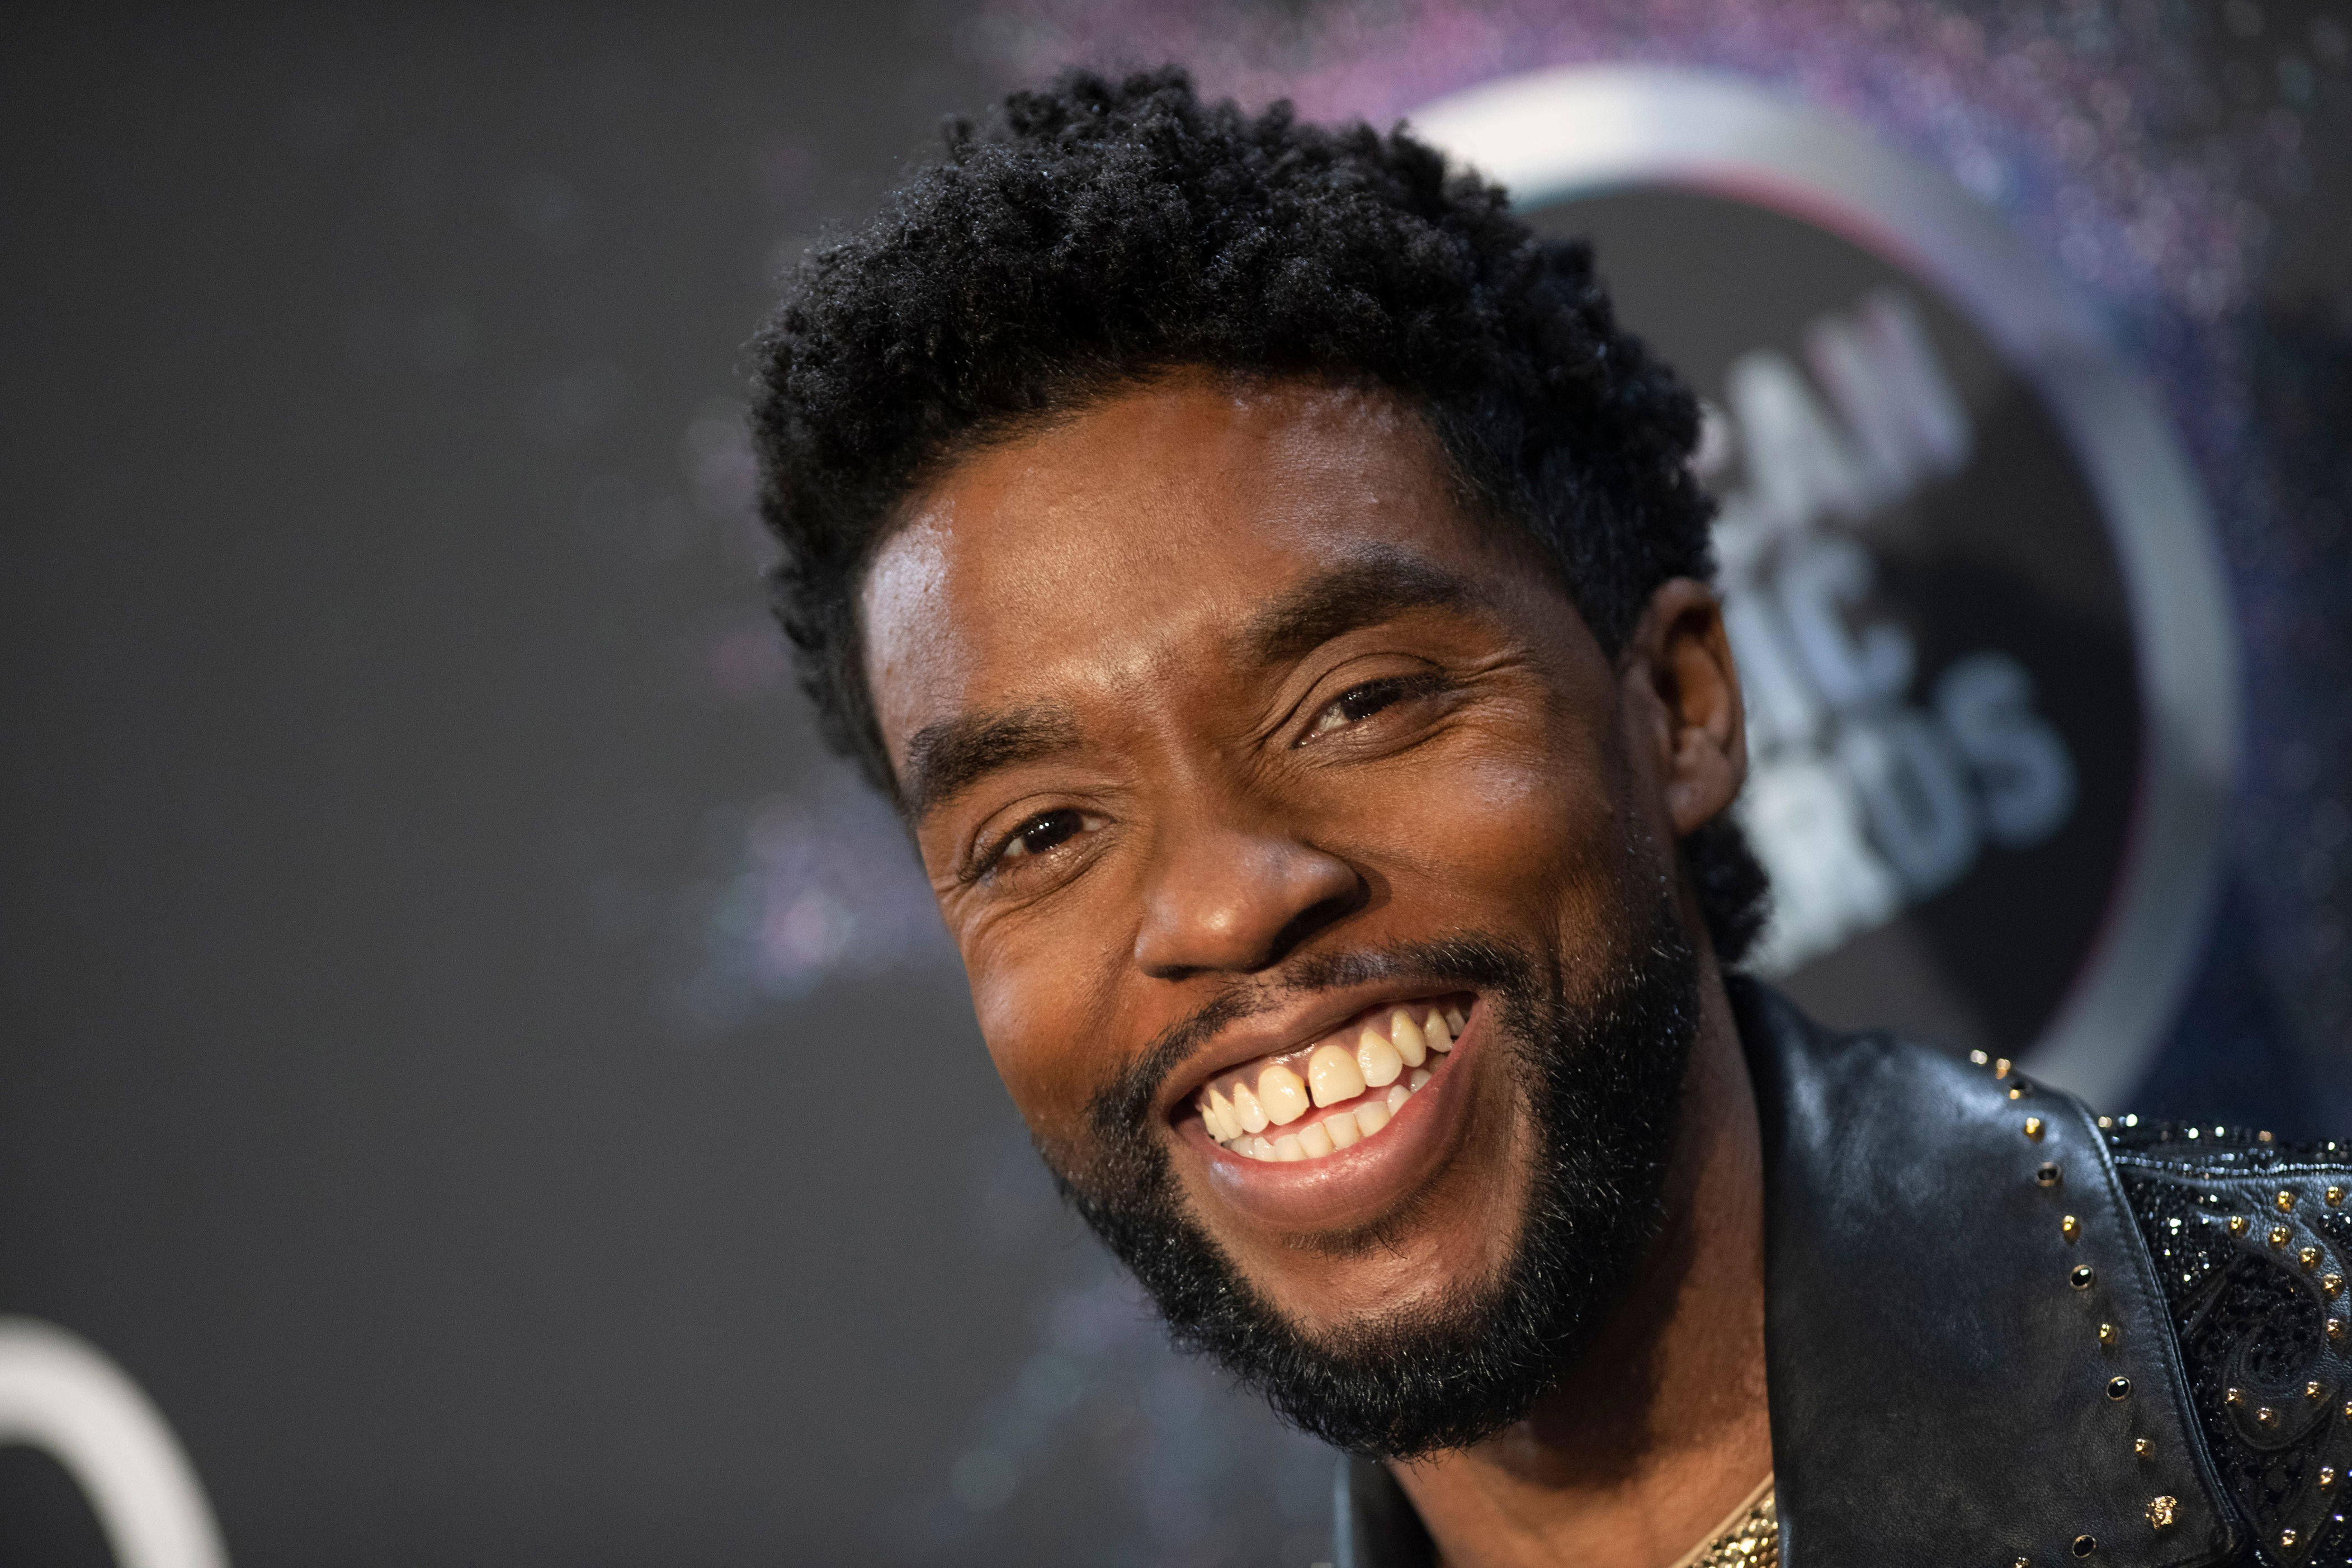 <p>It was a bittersweet moment: One day after earning his first <a href="https://www.wonderwall.com/awards-events/2021-golden-globe-nominees-see-their-reactions-423140.gallery">Golden Globe nomination</a> -- an award he later won posthumously -- Chadwick Boseman, who <a href="https://www.wonderwall.com/celebrity/celebrities-react-to-chadwick-bosemans-passing-378696.gallery">died in 2020 at 43 following a secret and lengthy battle with colon cancer</a>, made Screen Actors Guild Awards history. </p><p>On Feb. 4, 2021, <a href="https://www.wonderwall.com/celebrity/chrissy-teigen-stays-positive-while-hospitalized-for-surgery-more-news-423714.gallery?photoId=1051410">the star became the first actor</a> to receive four <a href="https://www.wonderwall.com/awards-events/2021-sag-awards-nominees-see-their-reactions-423735.gallery">SAG Award nominations</a> in a single year. </p><p>He was up for best actor for his performance opposite Viola Davis in "Ma Rainey's Black Bottom" -- he won that award -- as well as best supporting actor in filmmaker Spike Lee's "Da 5 Bloods." He was also twice nominated alongside his castmates in both films in the outstanding ensemble category. </p>